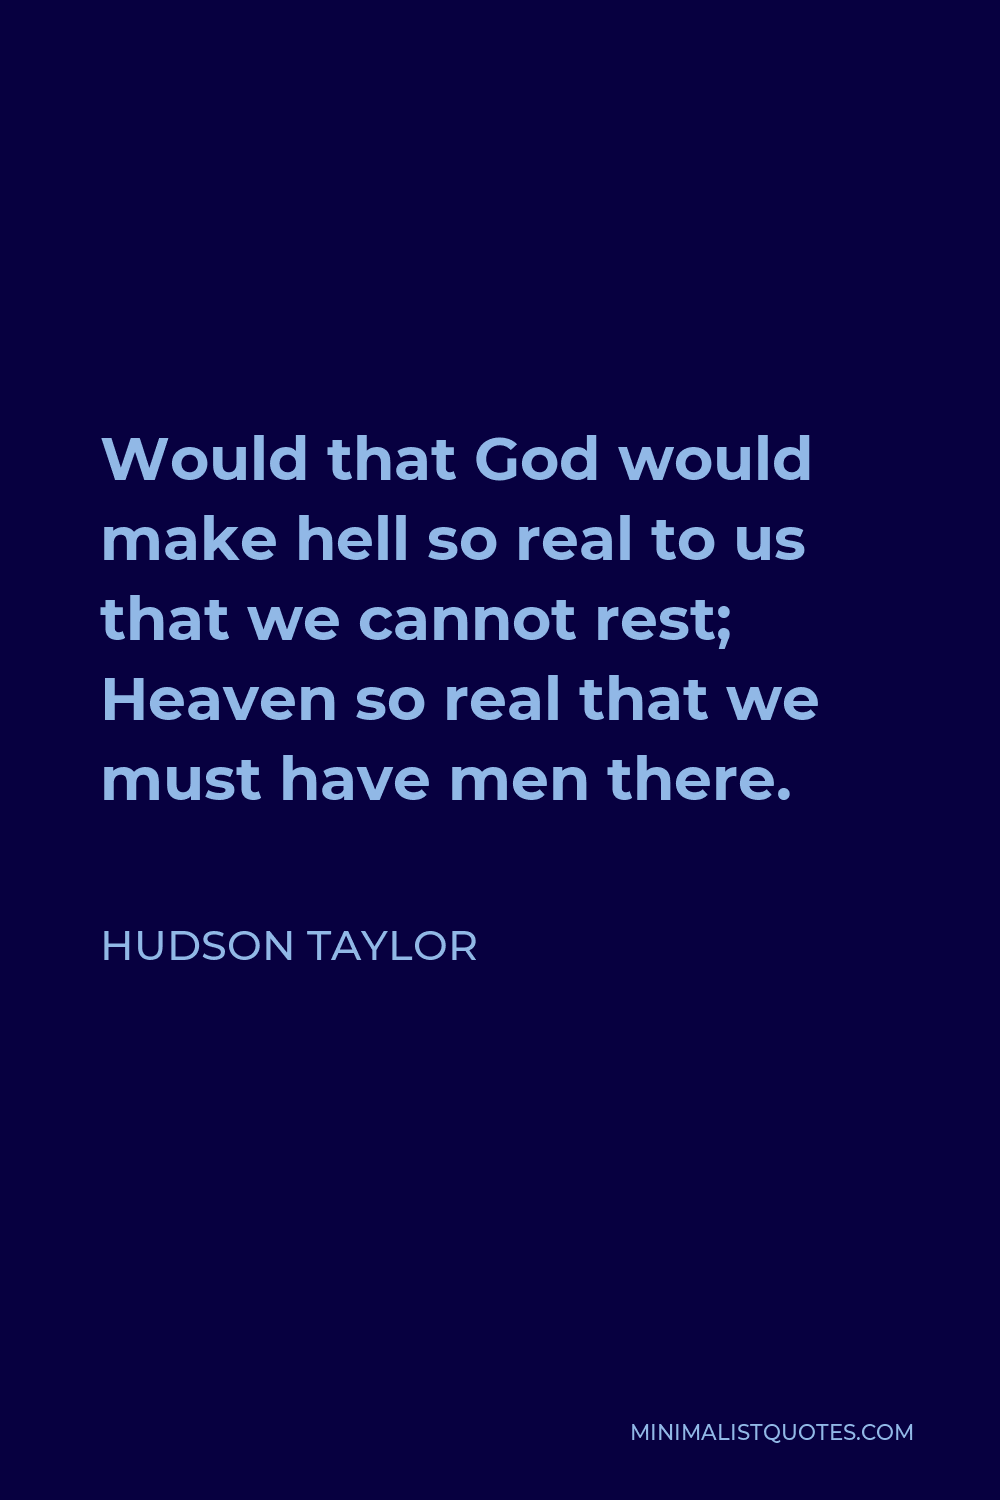 Hudson Taylor Quote - Would that God would make hell so real to us that we cannot rest; Heaven so real that we must have men there.